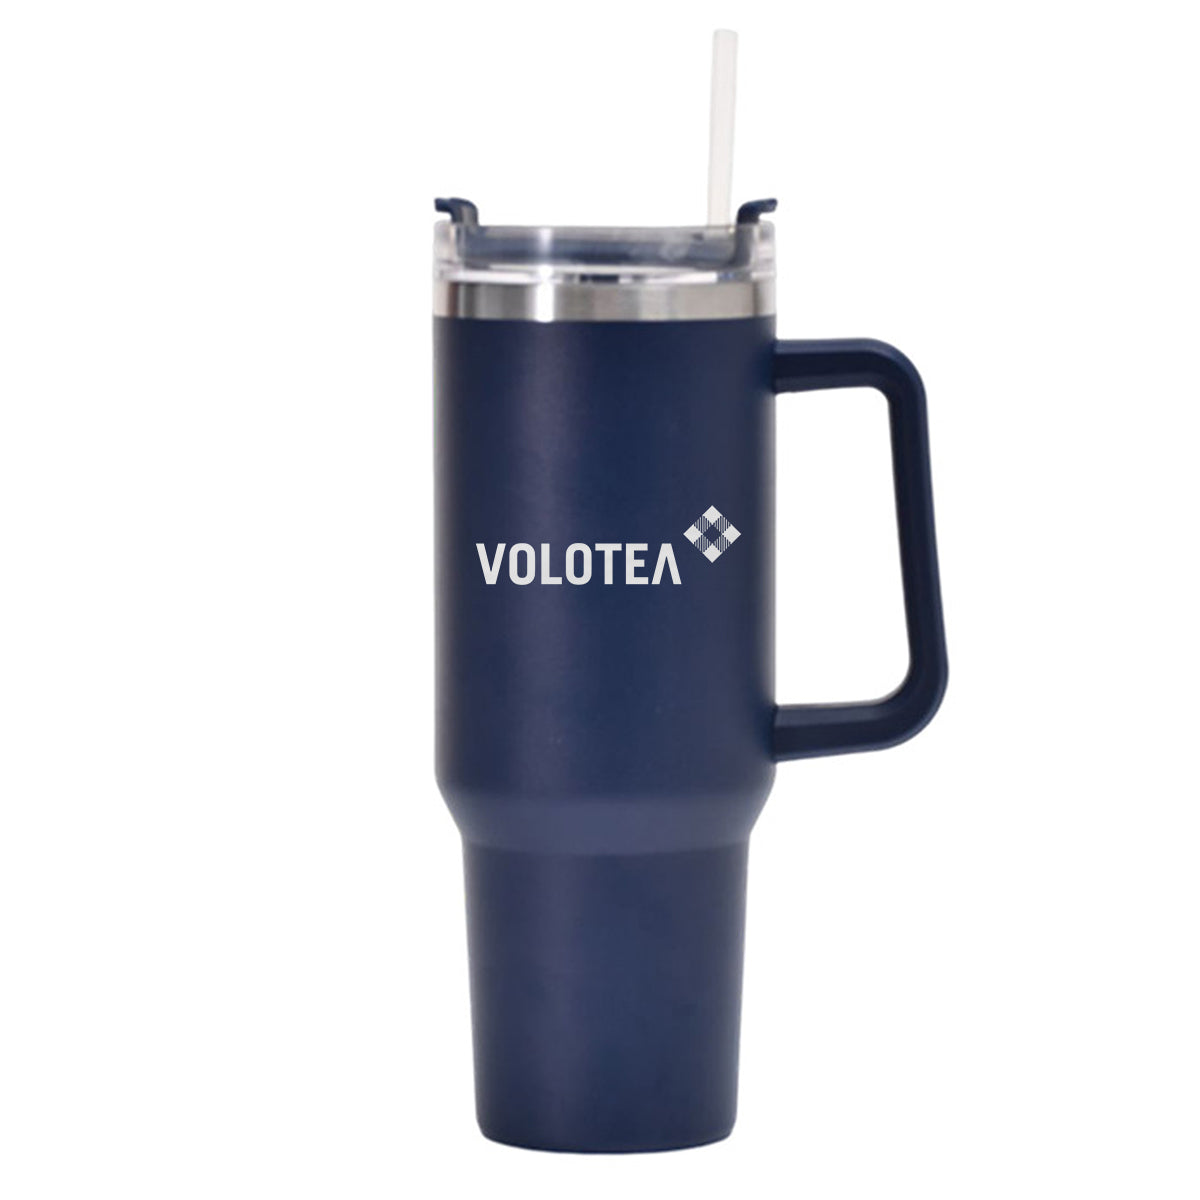 Volotea Airlines Designed 40oz Stainless Steel Car Mug With Holder